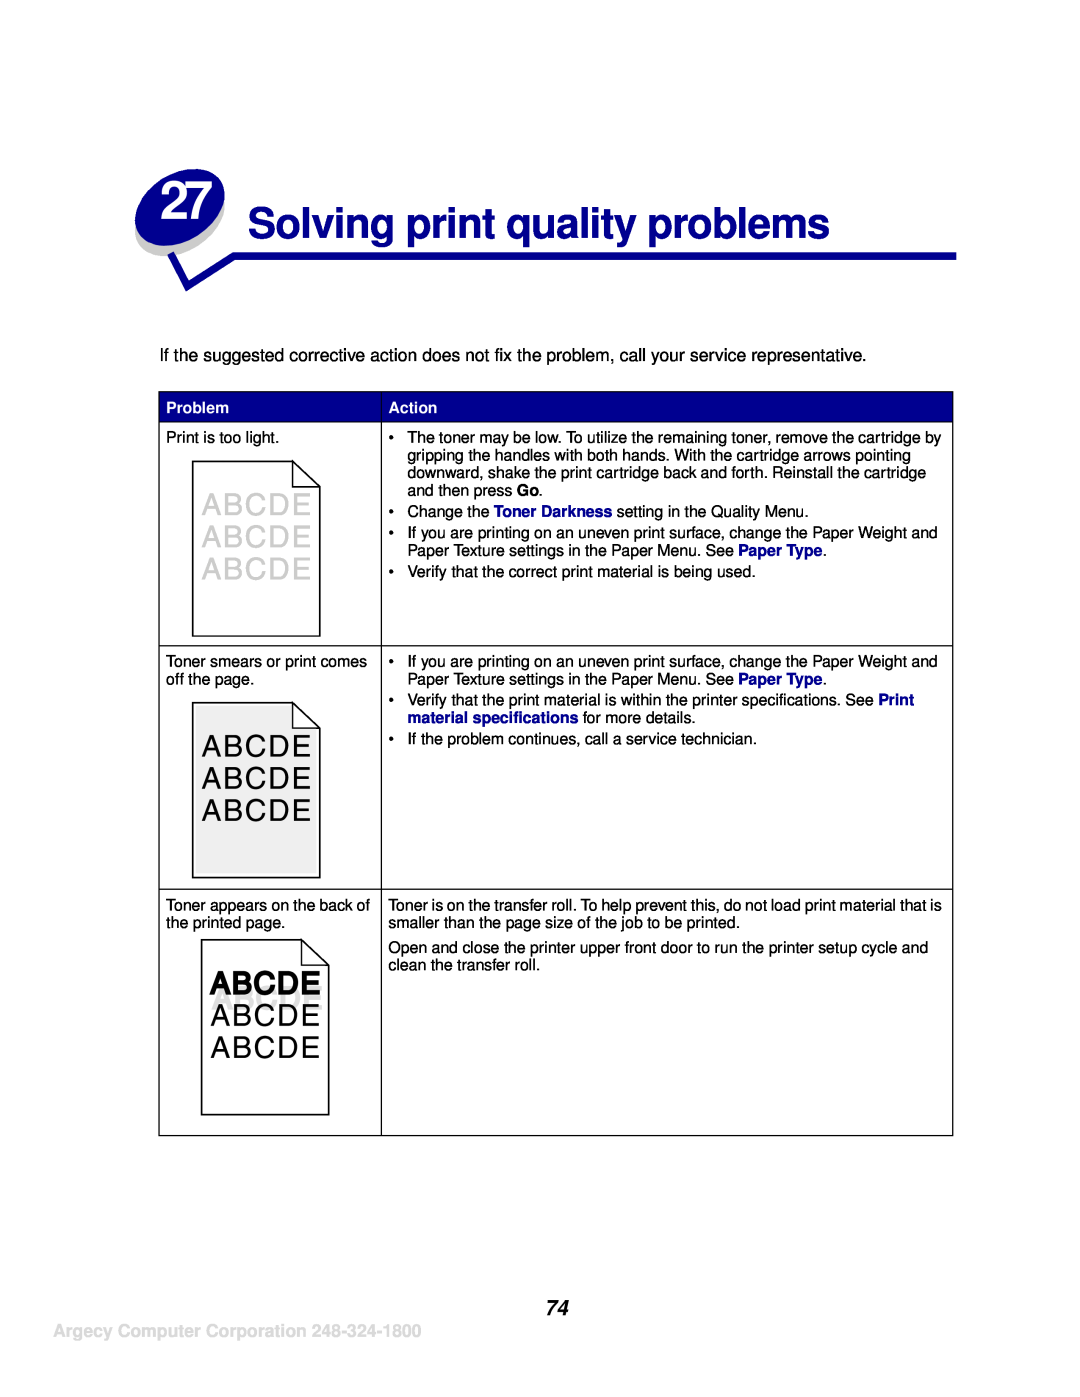 IBM 1125, 1120 manual Solving print quality problems, Argecy Computer Corporation, material specifications for more details 